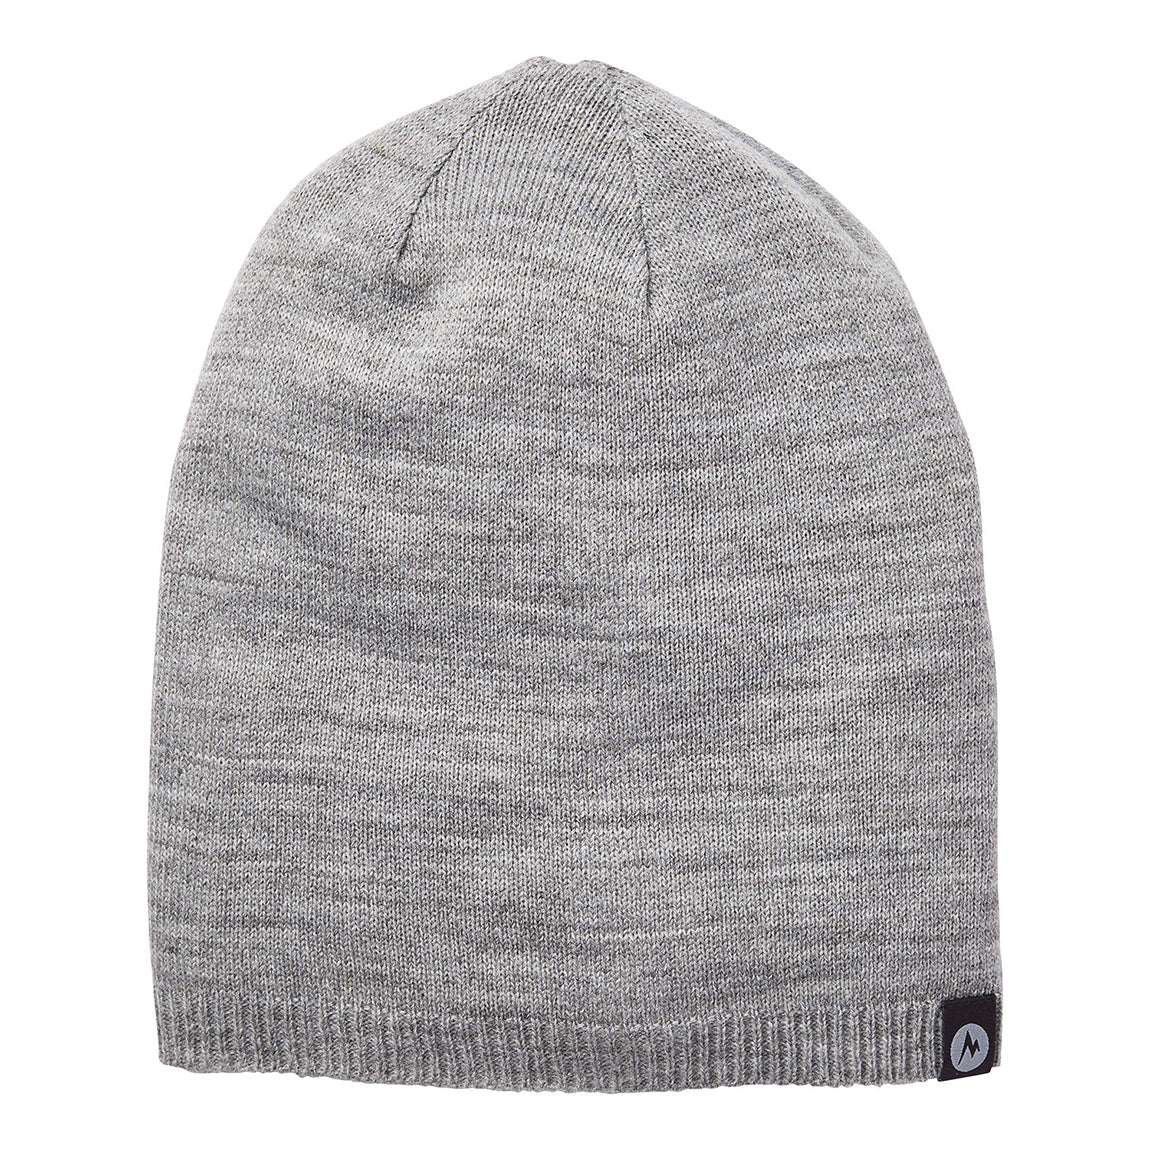 Tides Slouch Beanie